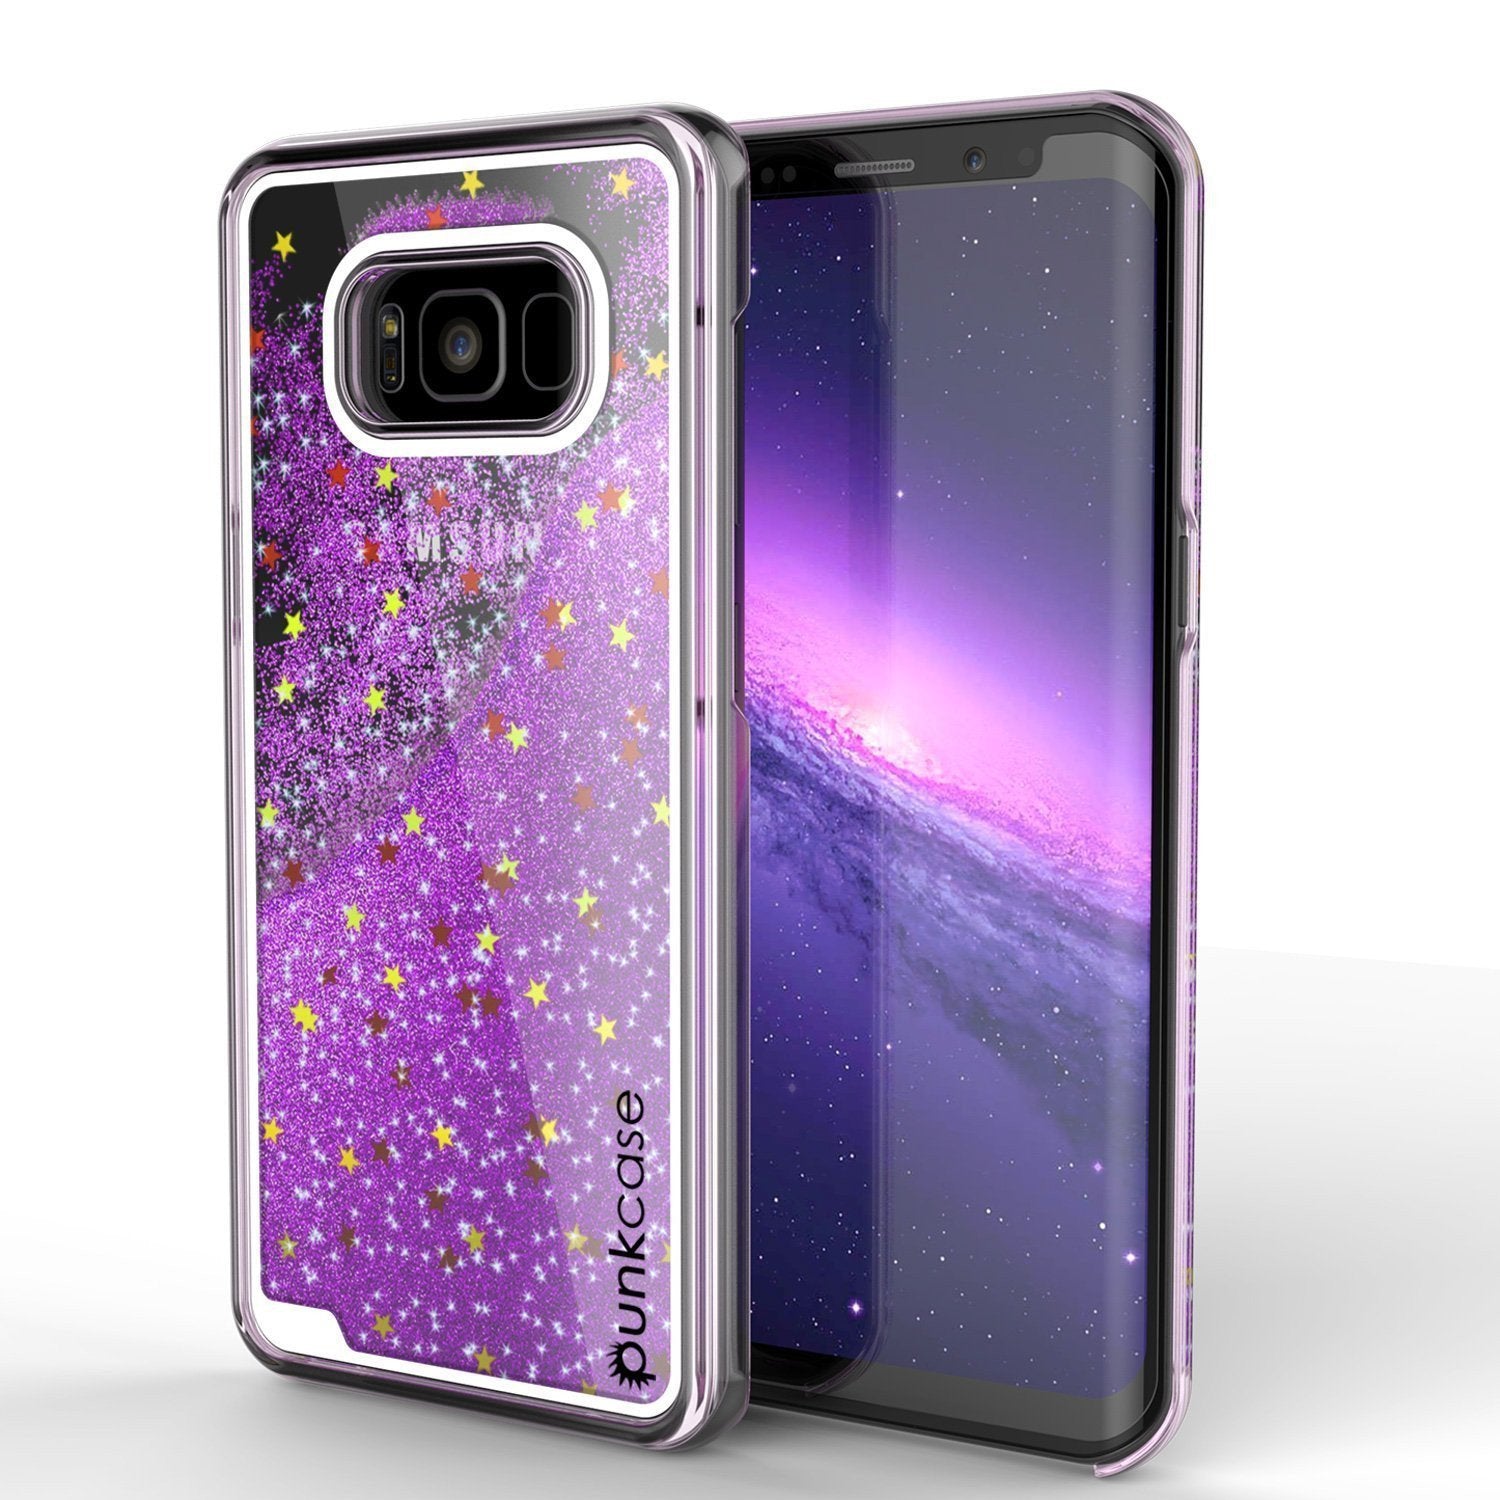 Galaxy S8 Case, Punkcase [Liquid Series] Protective Dual Layer Floating Glitter Cover [Purple]